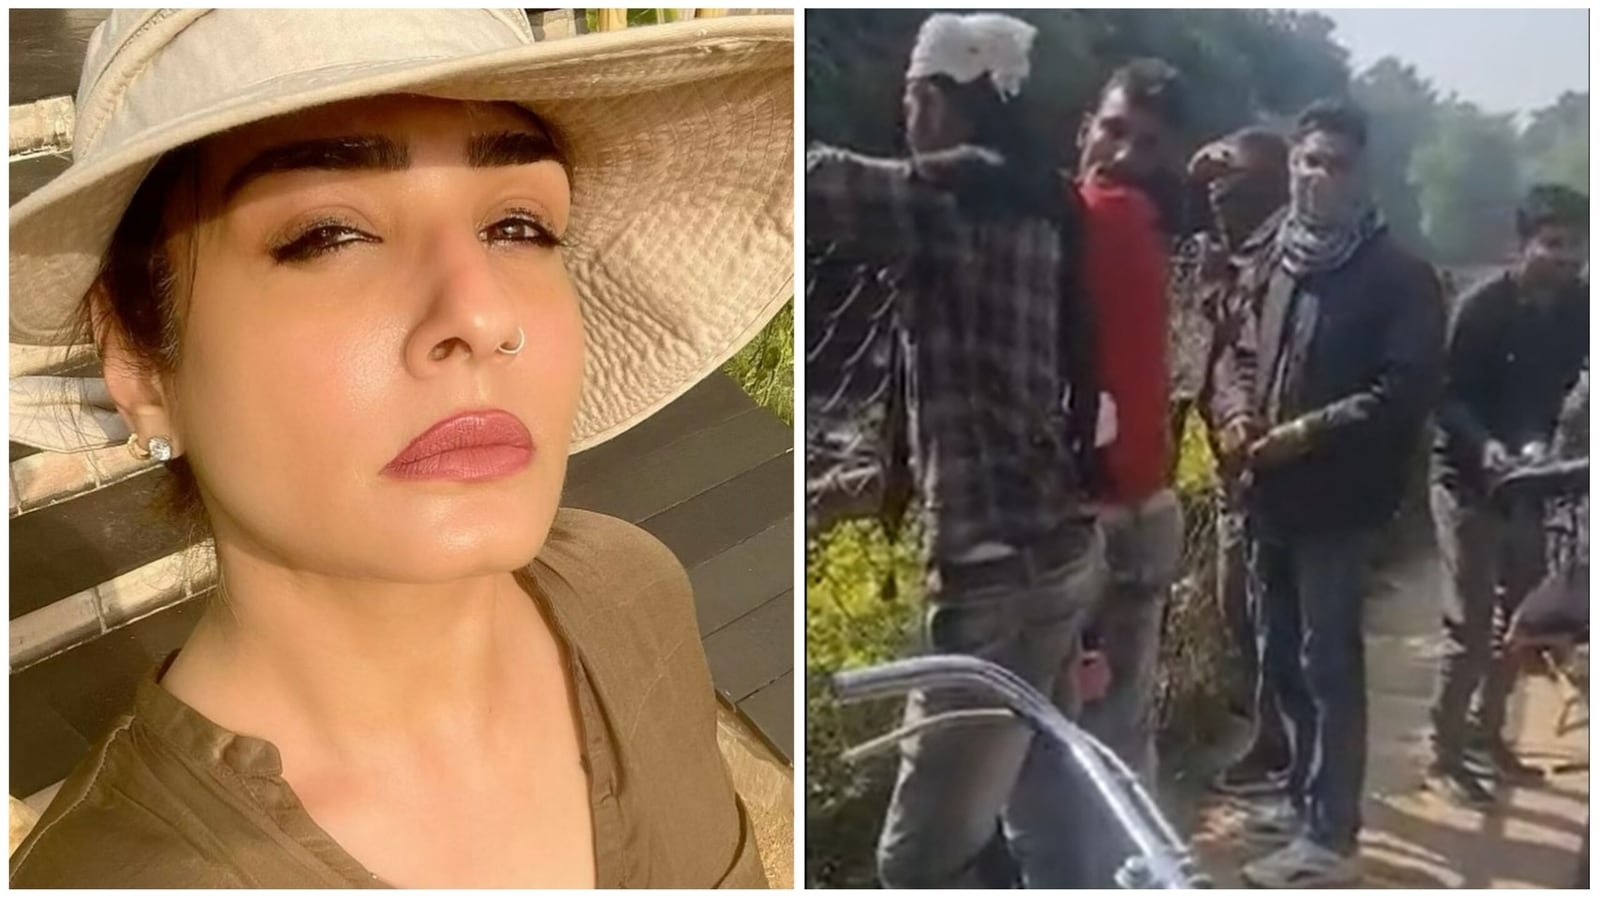 Raveena Tandon’s tweet about people pelting stones at tiger at Bhopal’s national park prompts probe